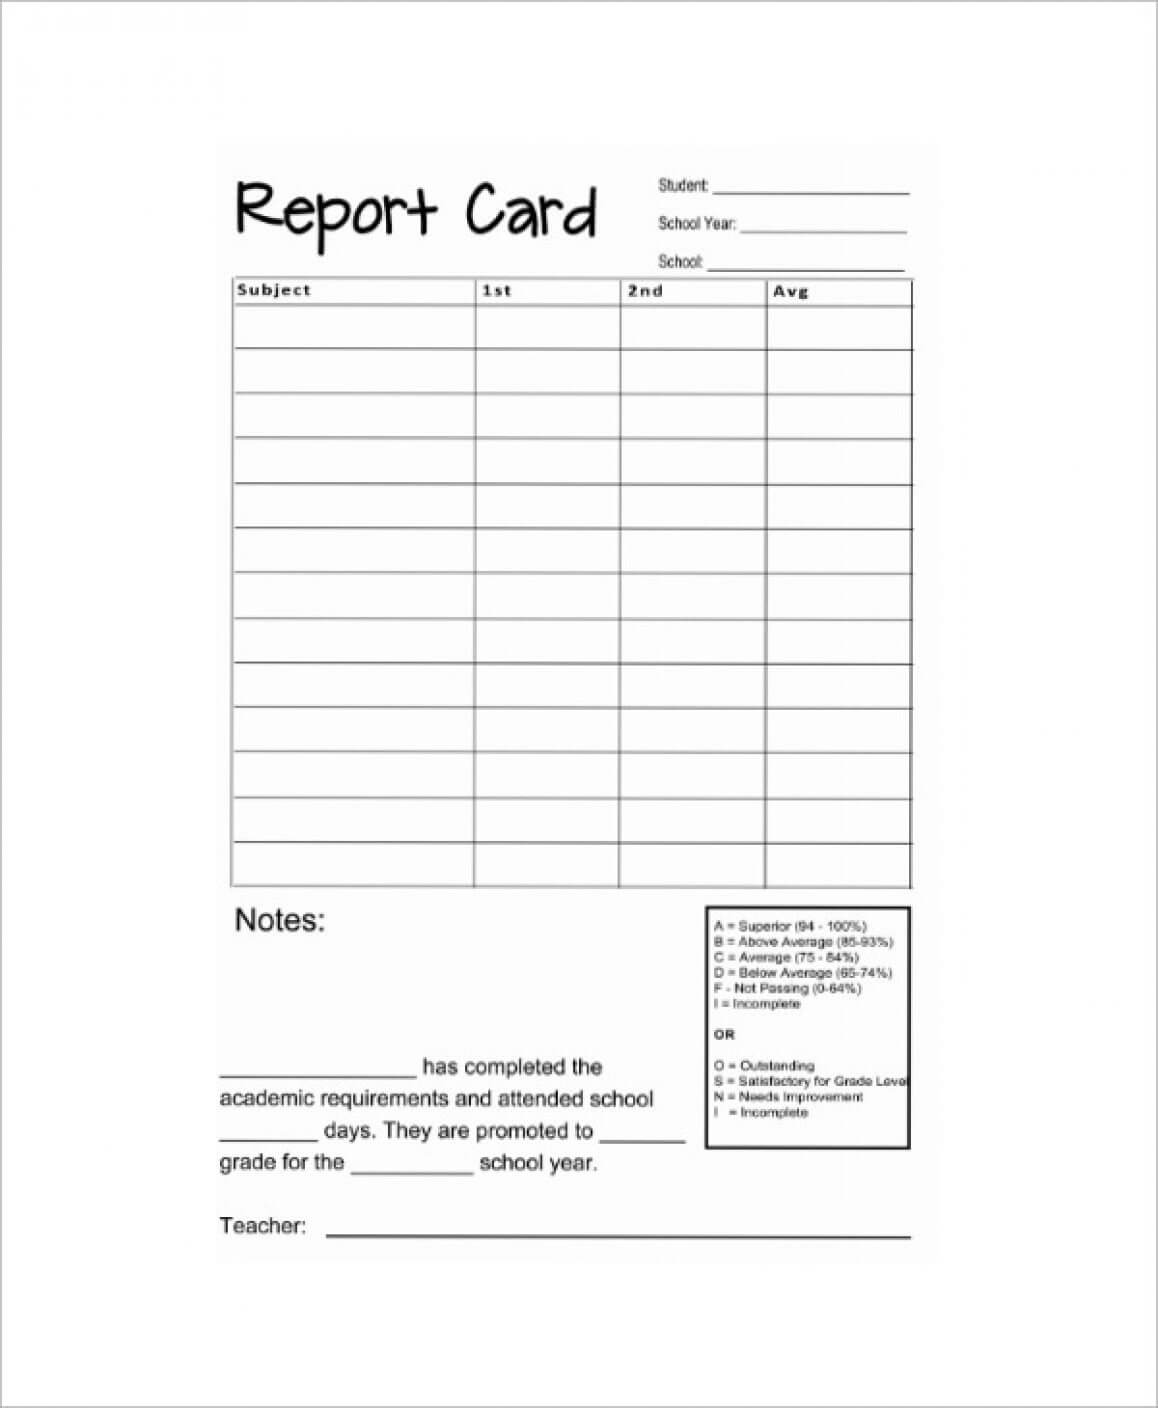 Acceptance Card Template Necessary 10 Sample Report Cards Regarding Acceptance Card Template